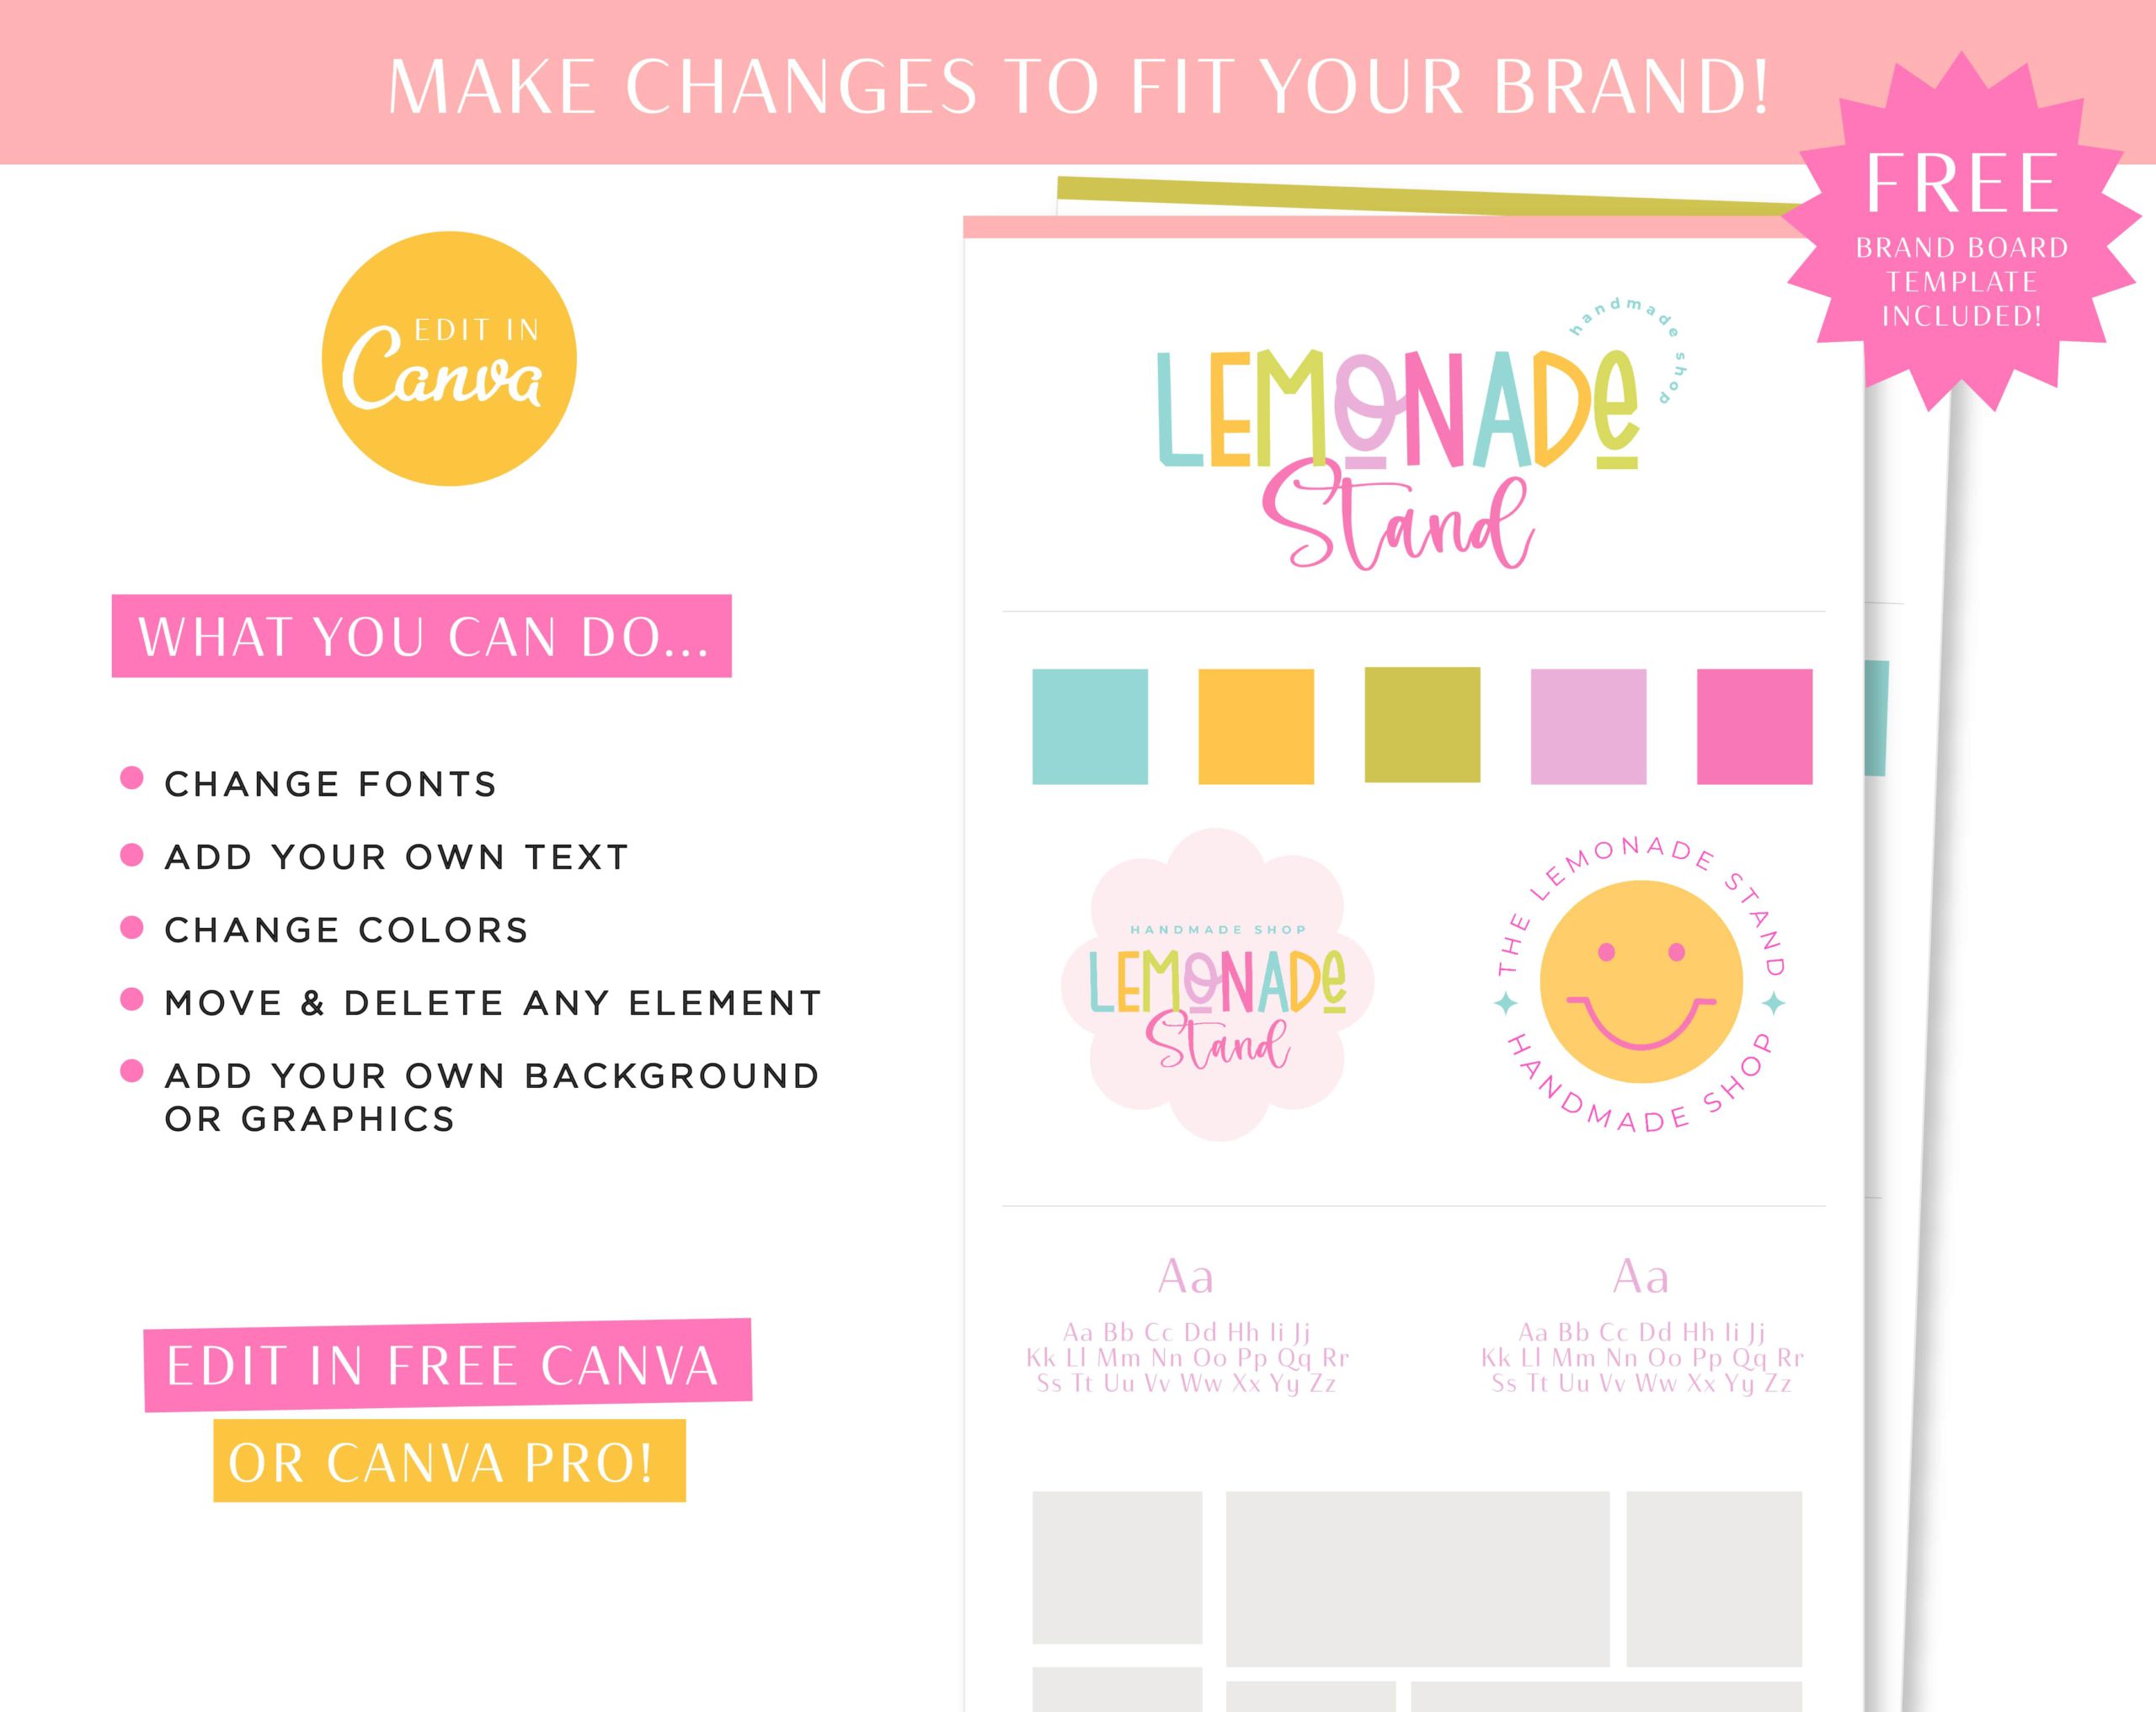 Boho Semi-Custom Brand Design includes one Main Logo, a Secondary Logo, Typography suggestions Curated Stock Photos, and more! 